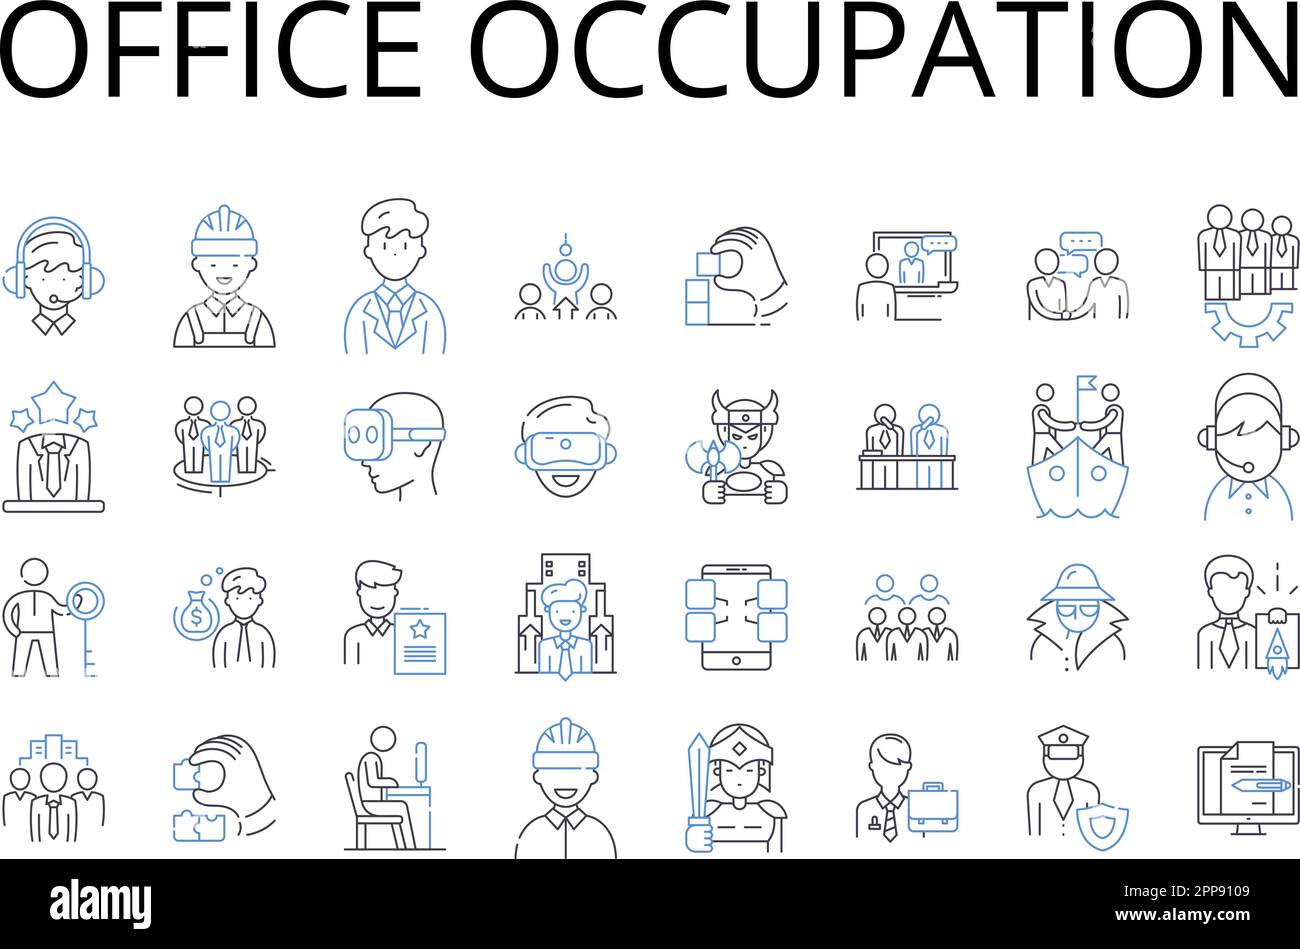 Office occupation line icons collection. Classroom learning, Business venture, Social gathering, Romantic rendezvous, Creative endeavor, Academic Stock Vector